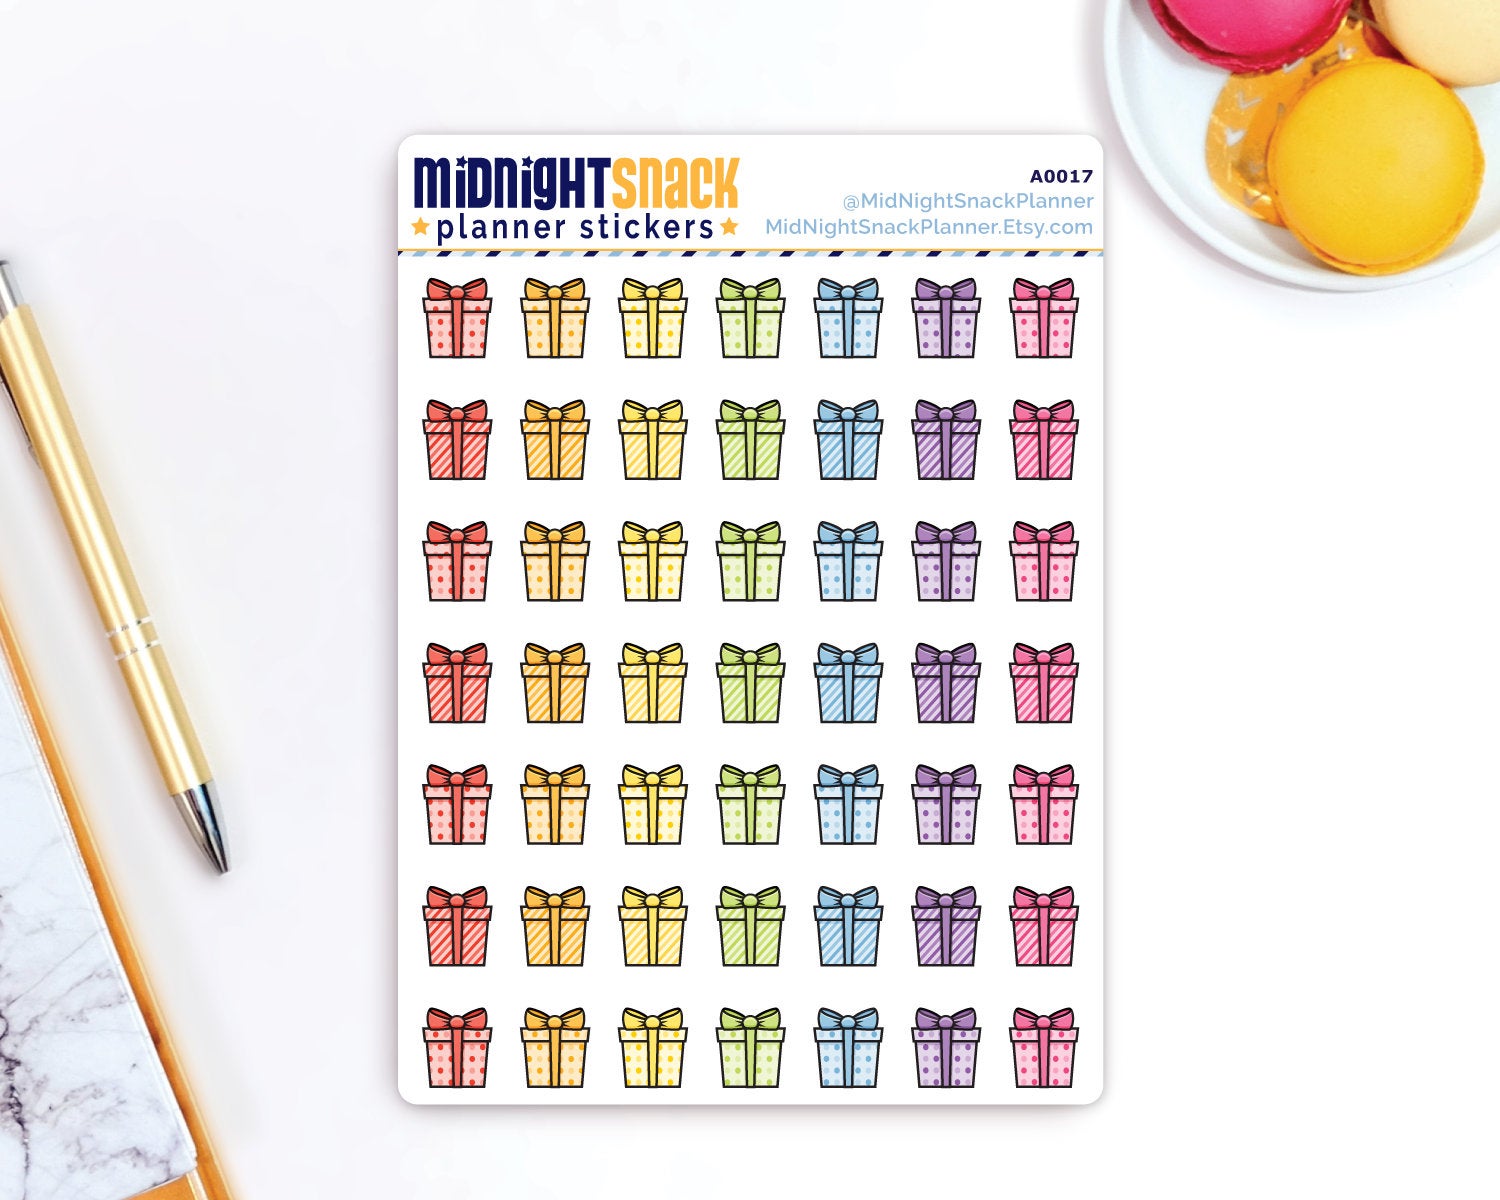 Small Christmas Presents Icon: Holiday Planner Stickers Midnight Snack Planner